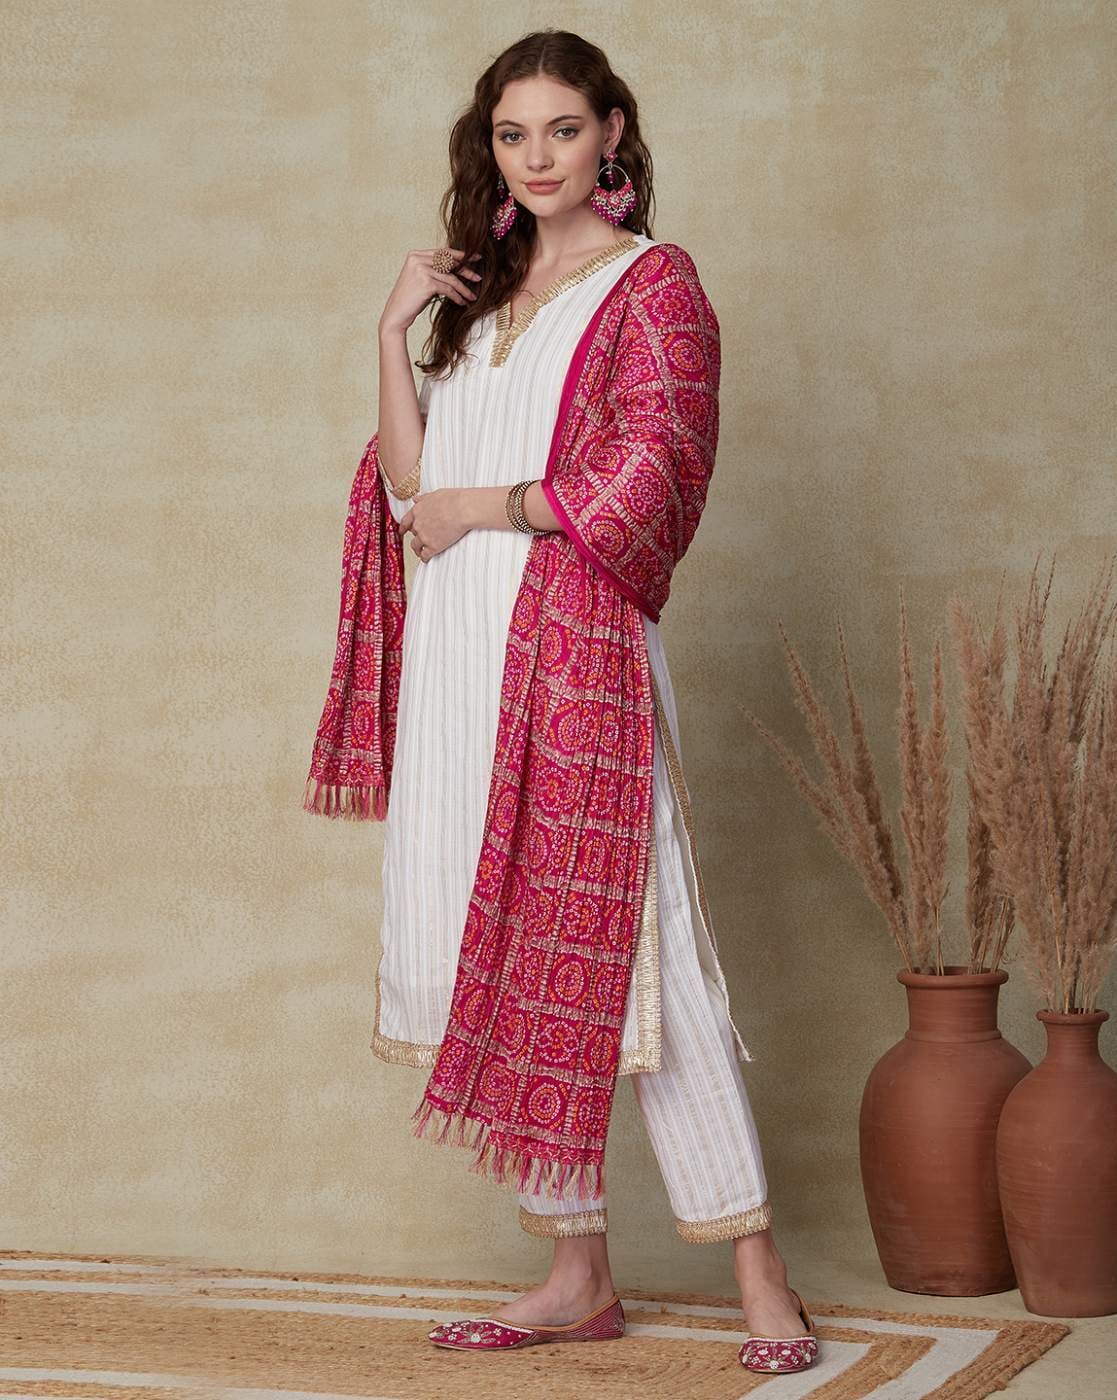 Cotton Embroidered Straight Suit Un-Stitched Material | Kurti designs,  Cotton kurti designs, Kurti designs party wear